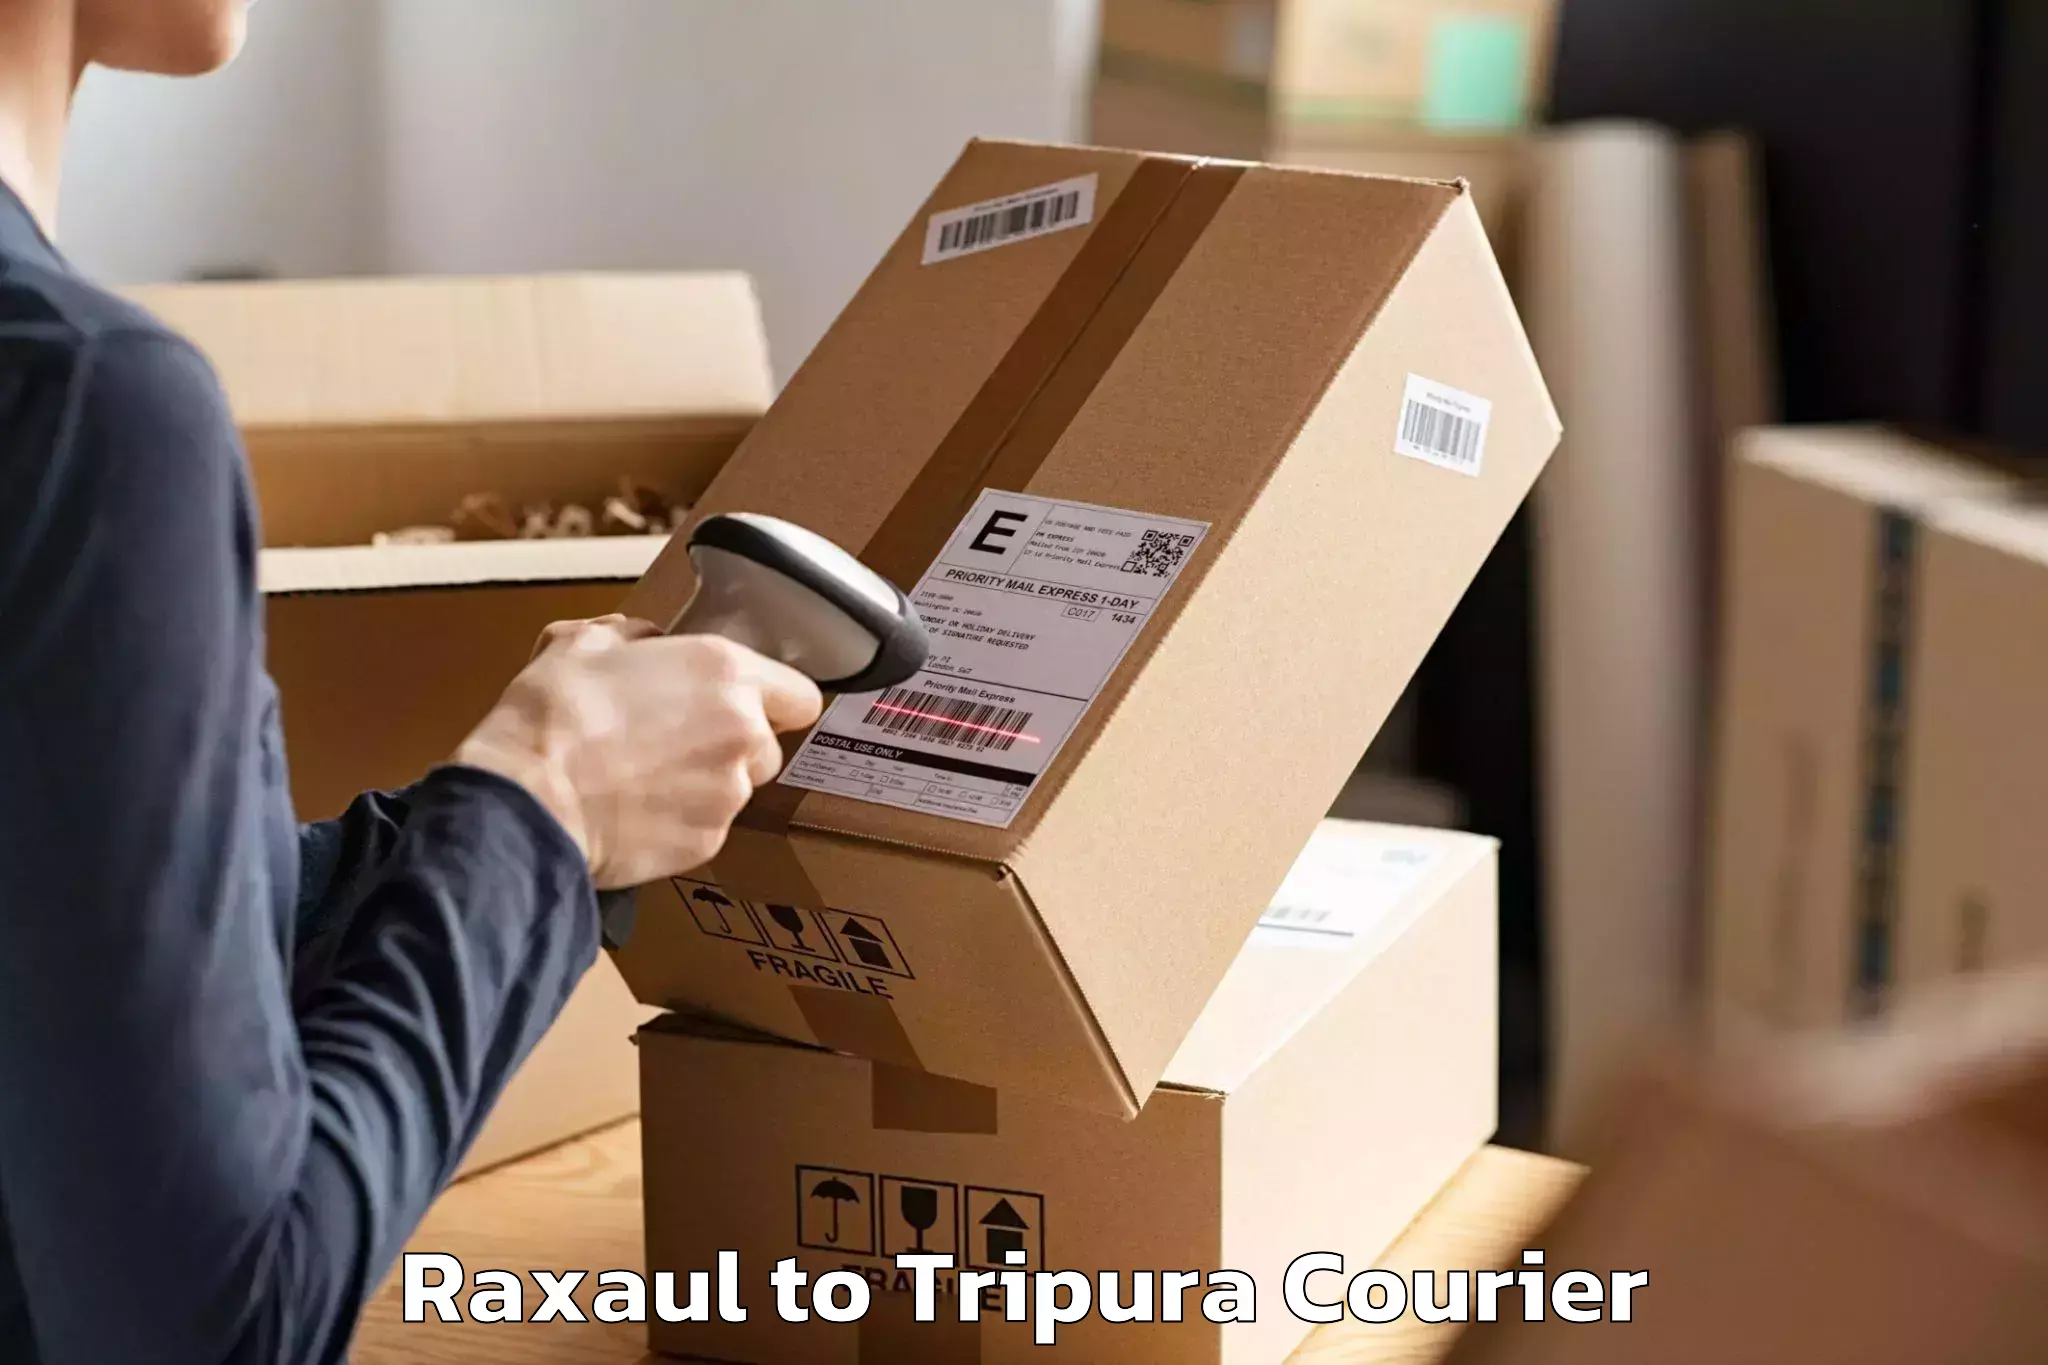 Furniture delivery service Raxaul to Udaipur Tripura